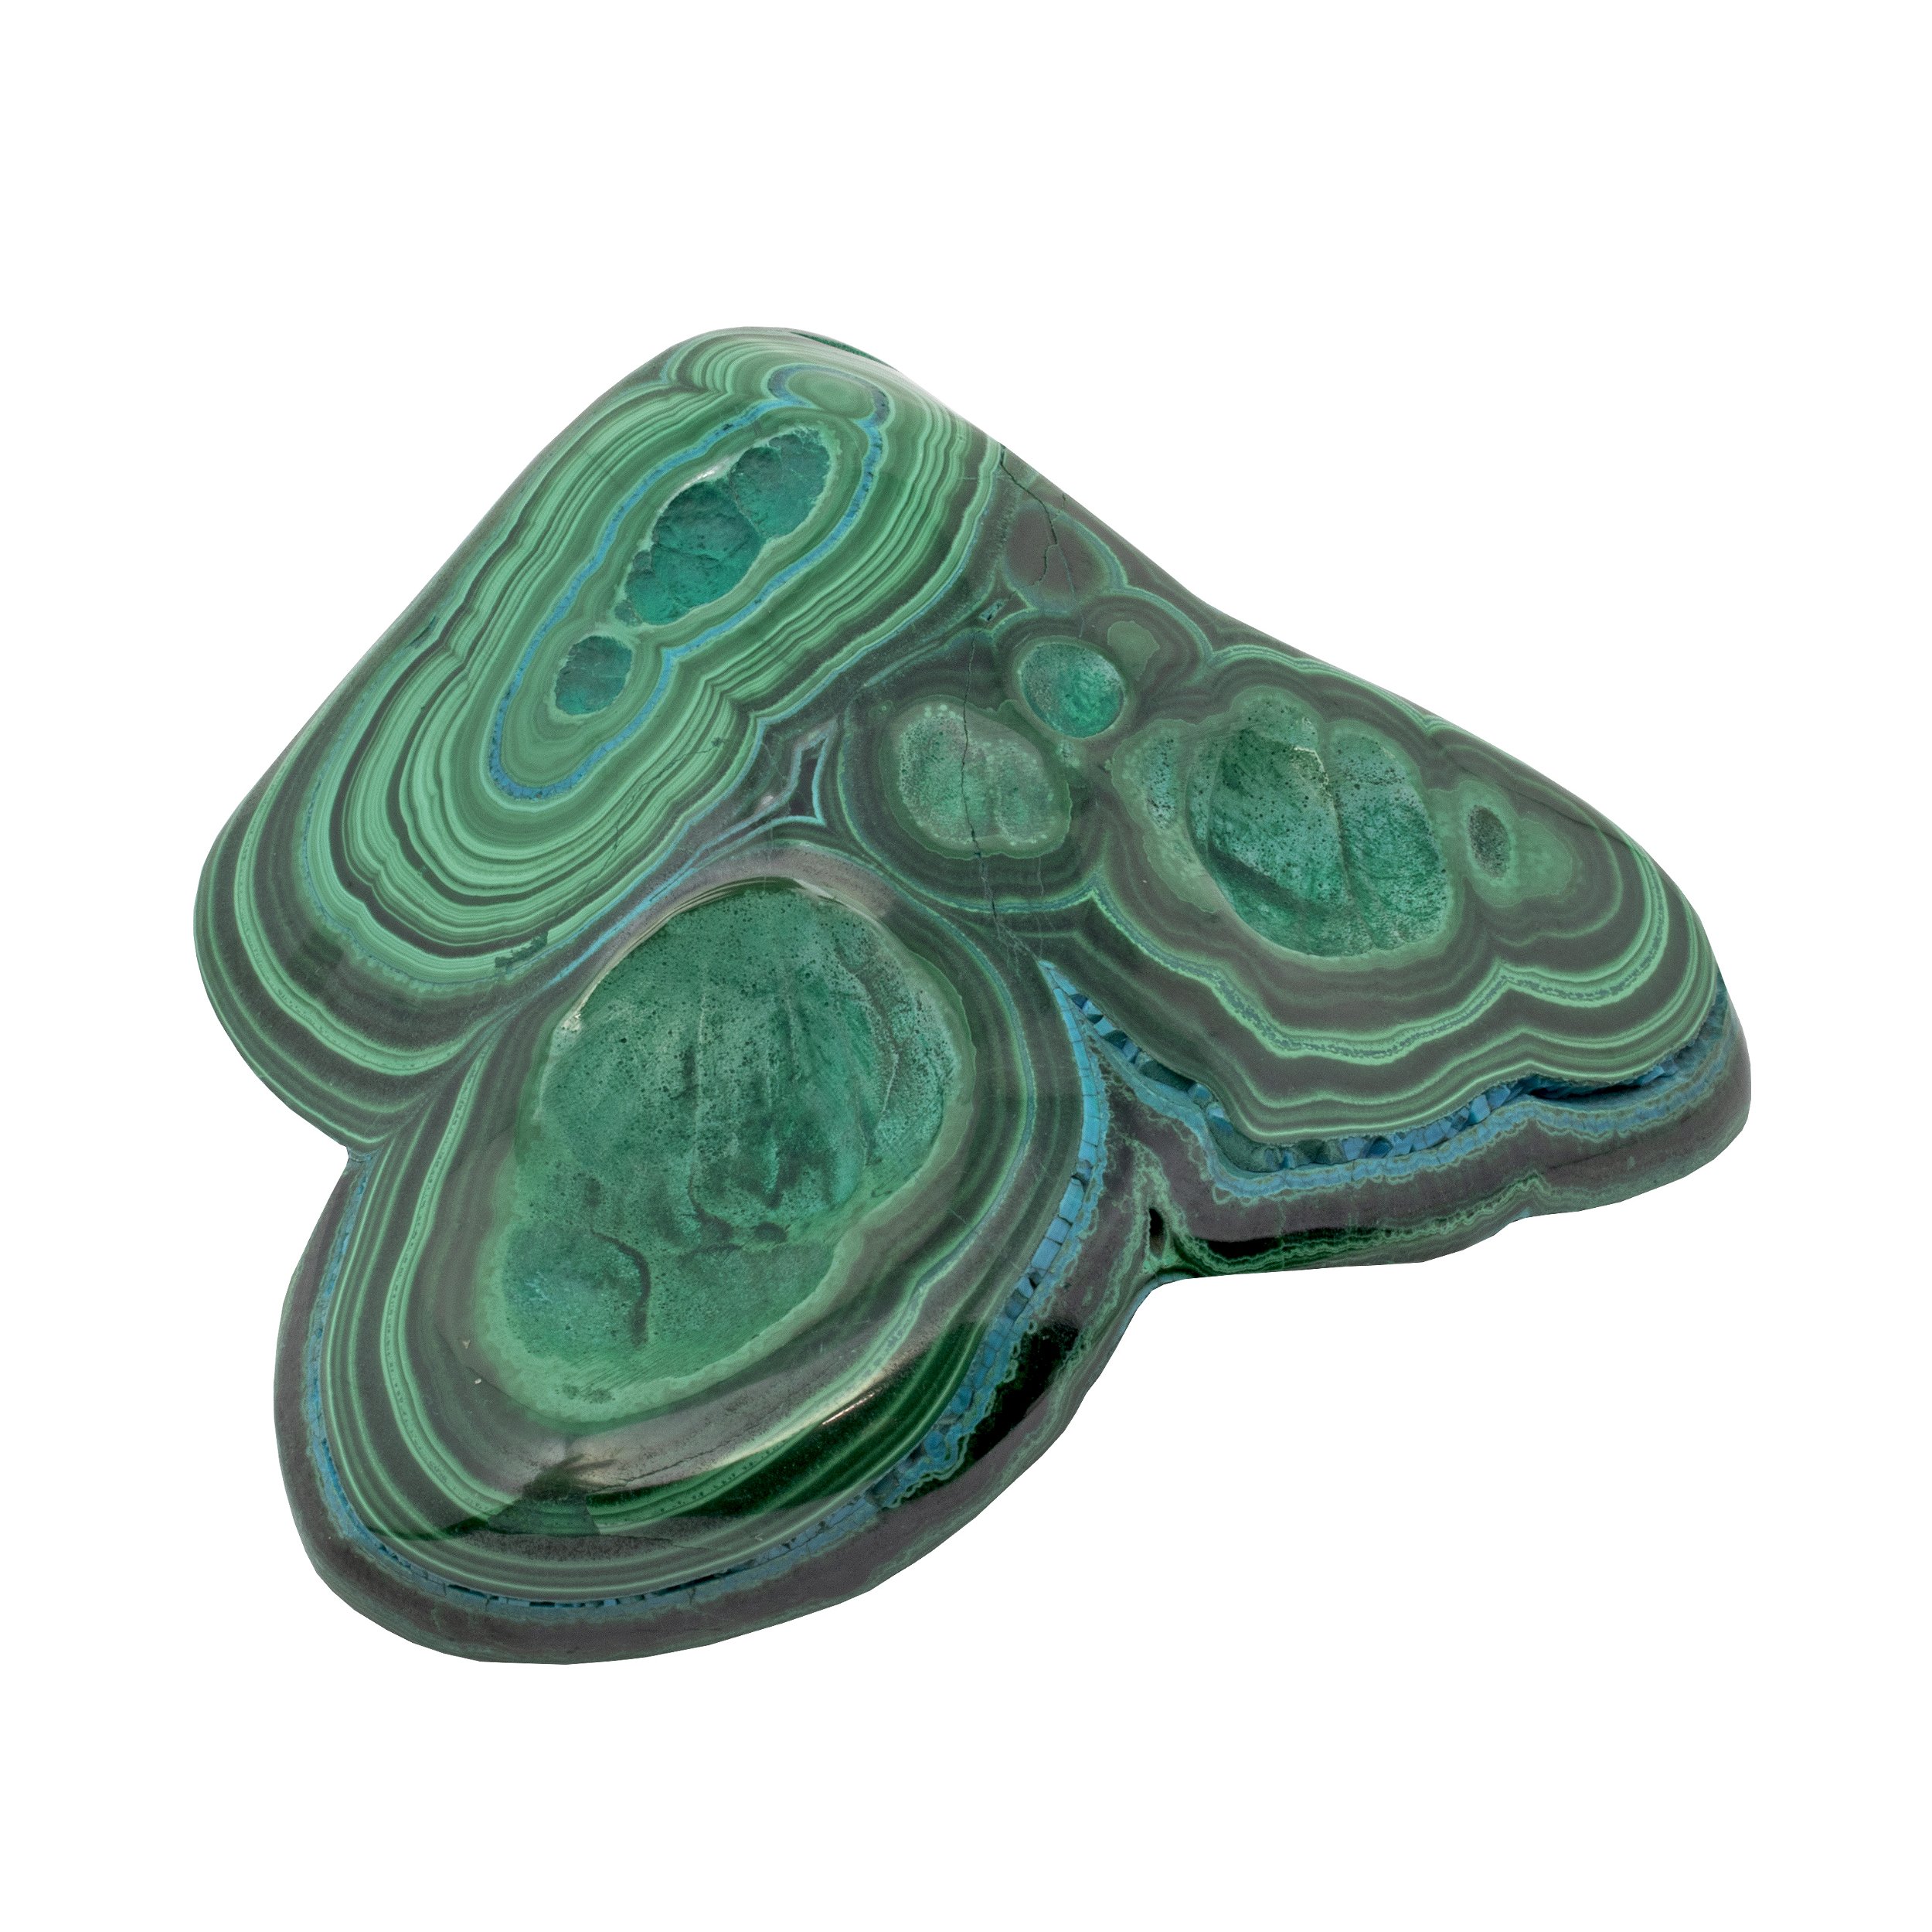 Chrysocolla Malachite Freeform Polished - 3 Indentations On The Face With Green Banding